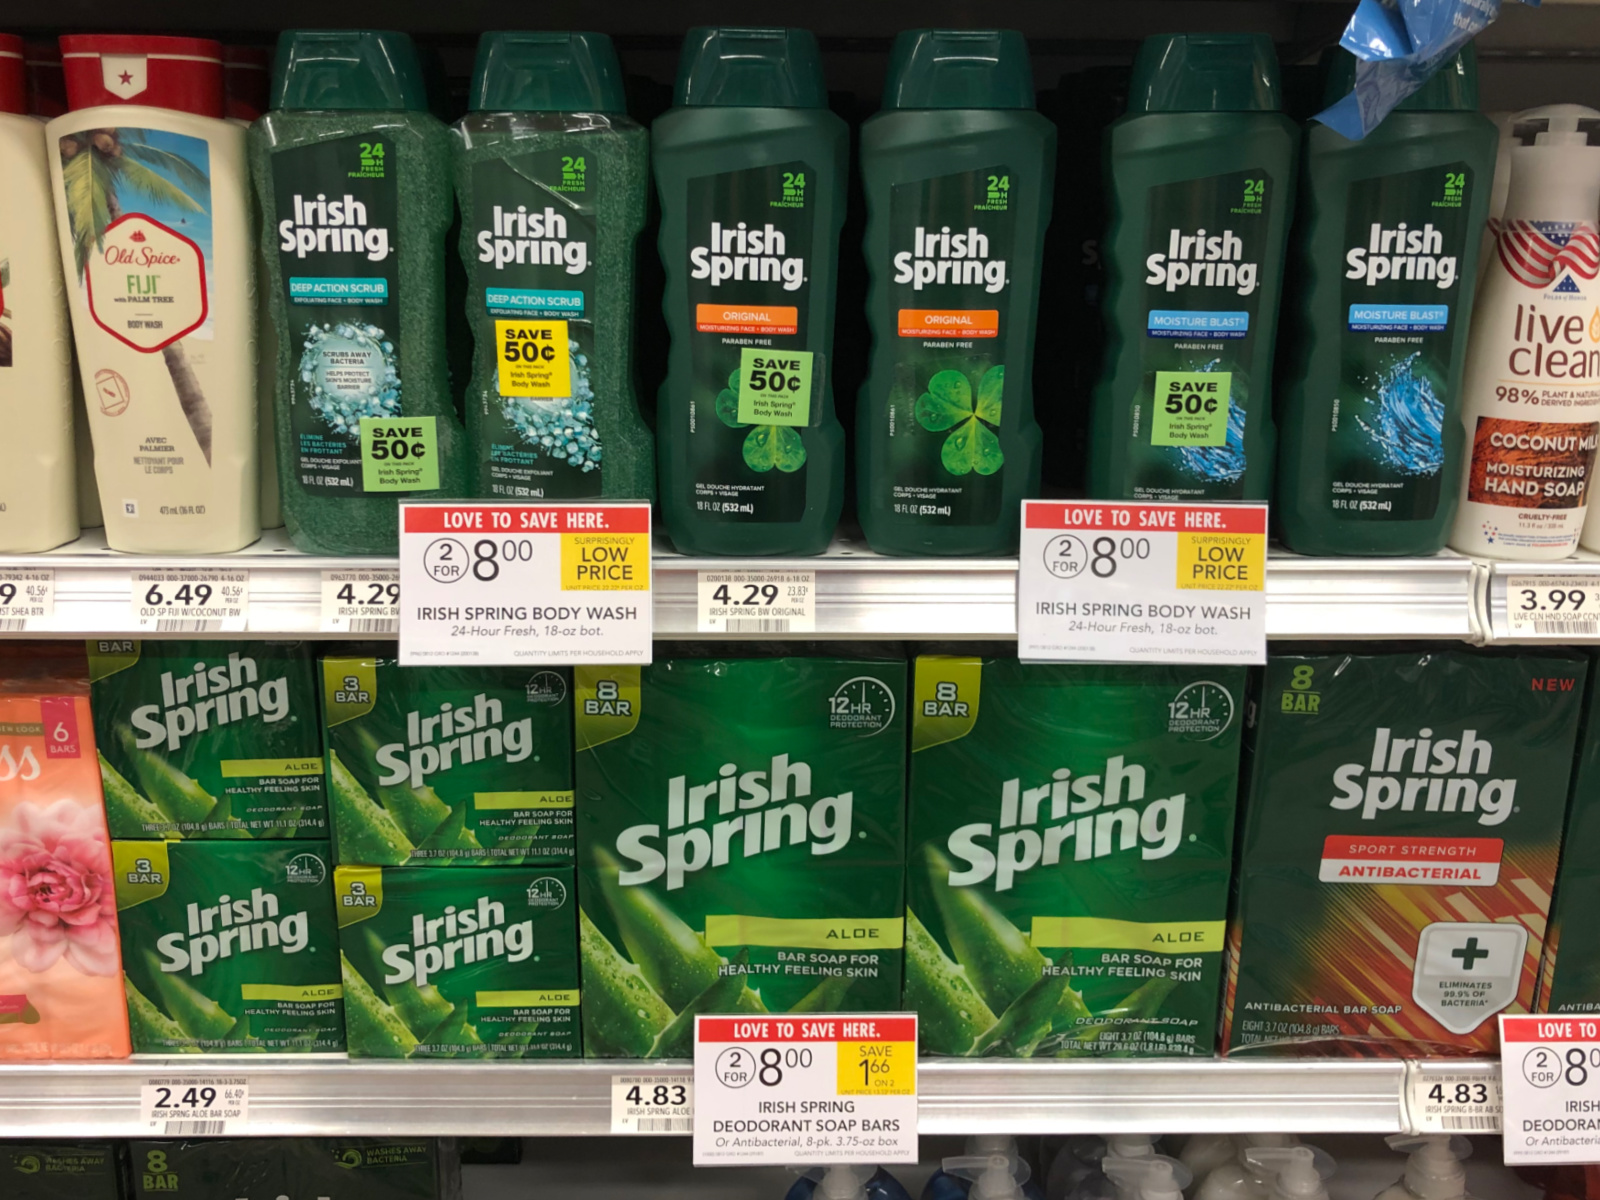 Irish Spring Coupons For The Publix Sale - Body Wash or 8pk Bar Soap Just $3 (Regular Price $4.29) on I Heart Publix 1